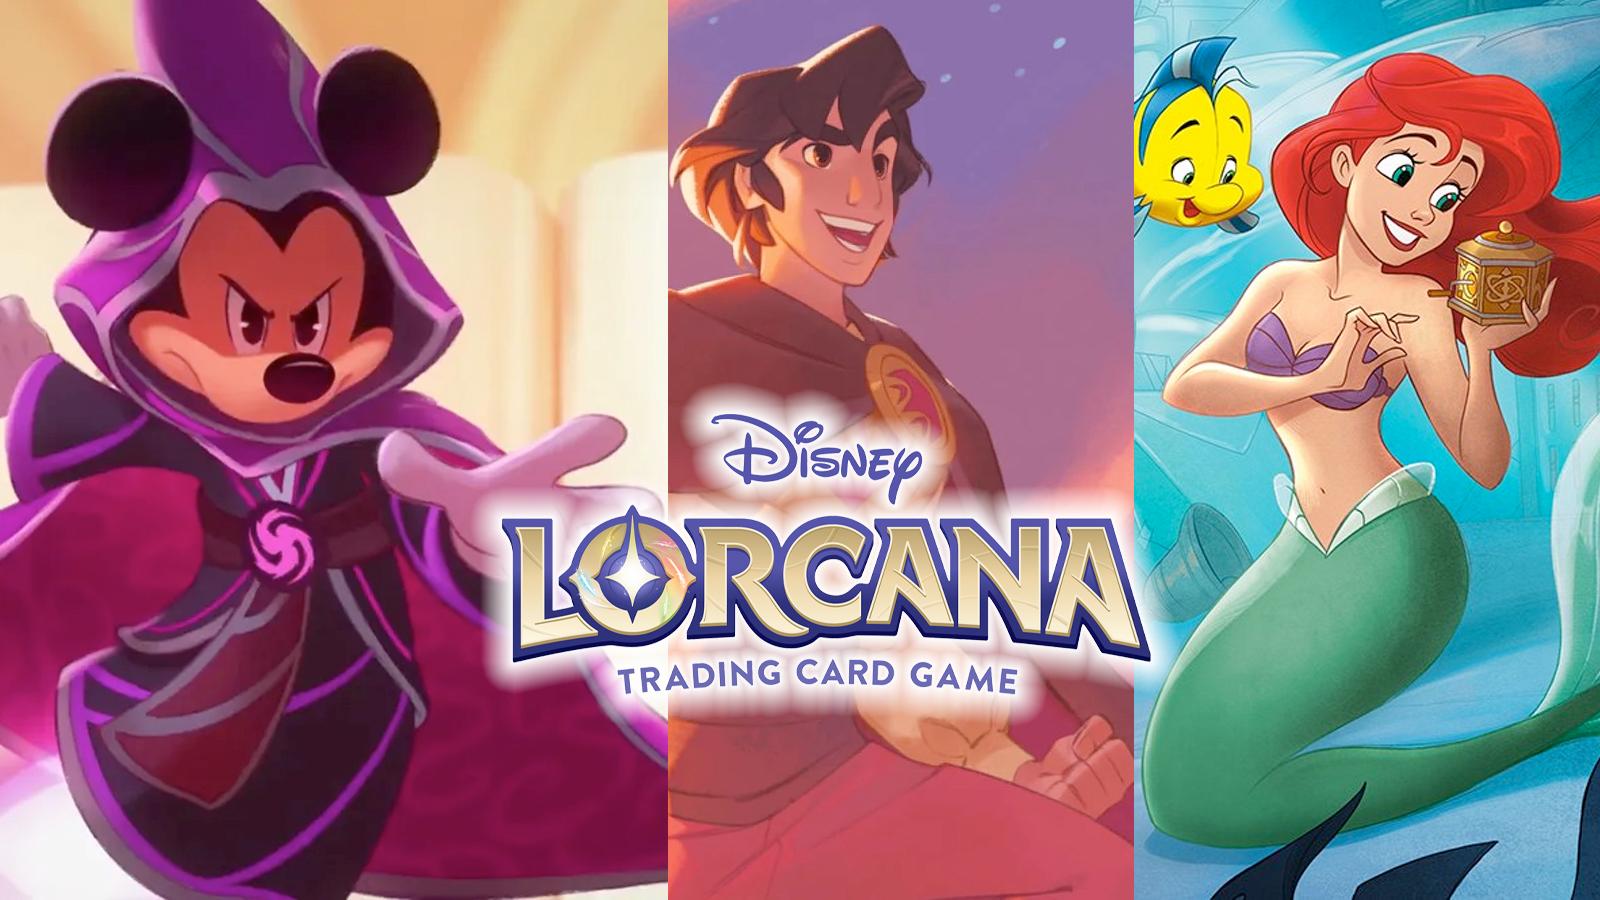 Disney Lorcana character art with the logo on top